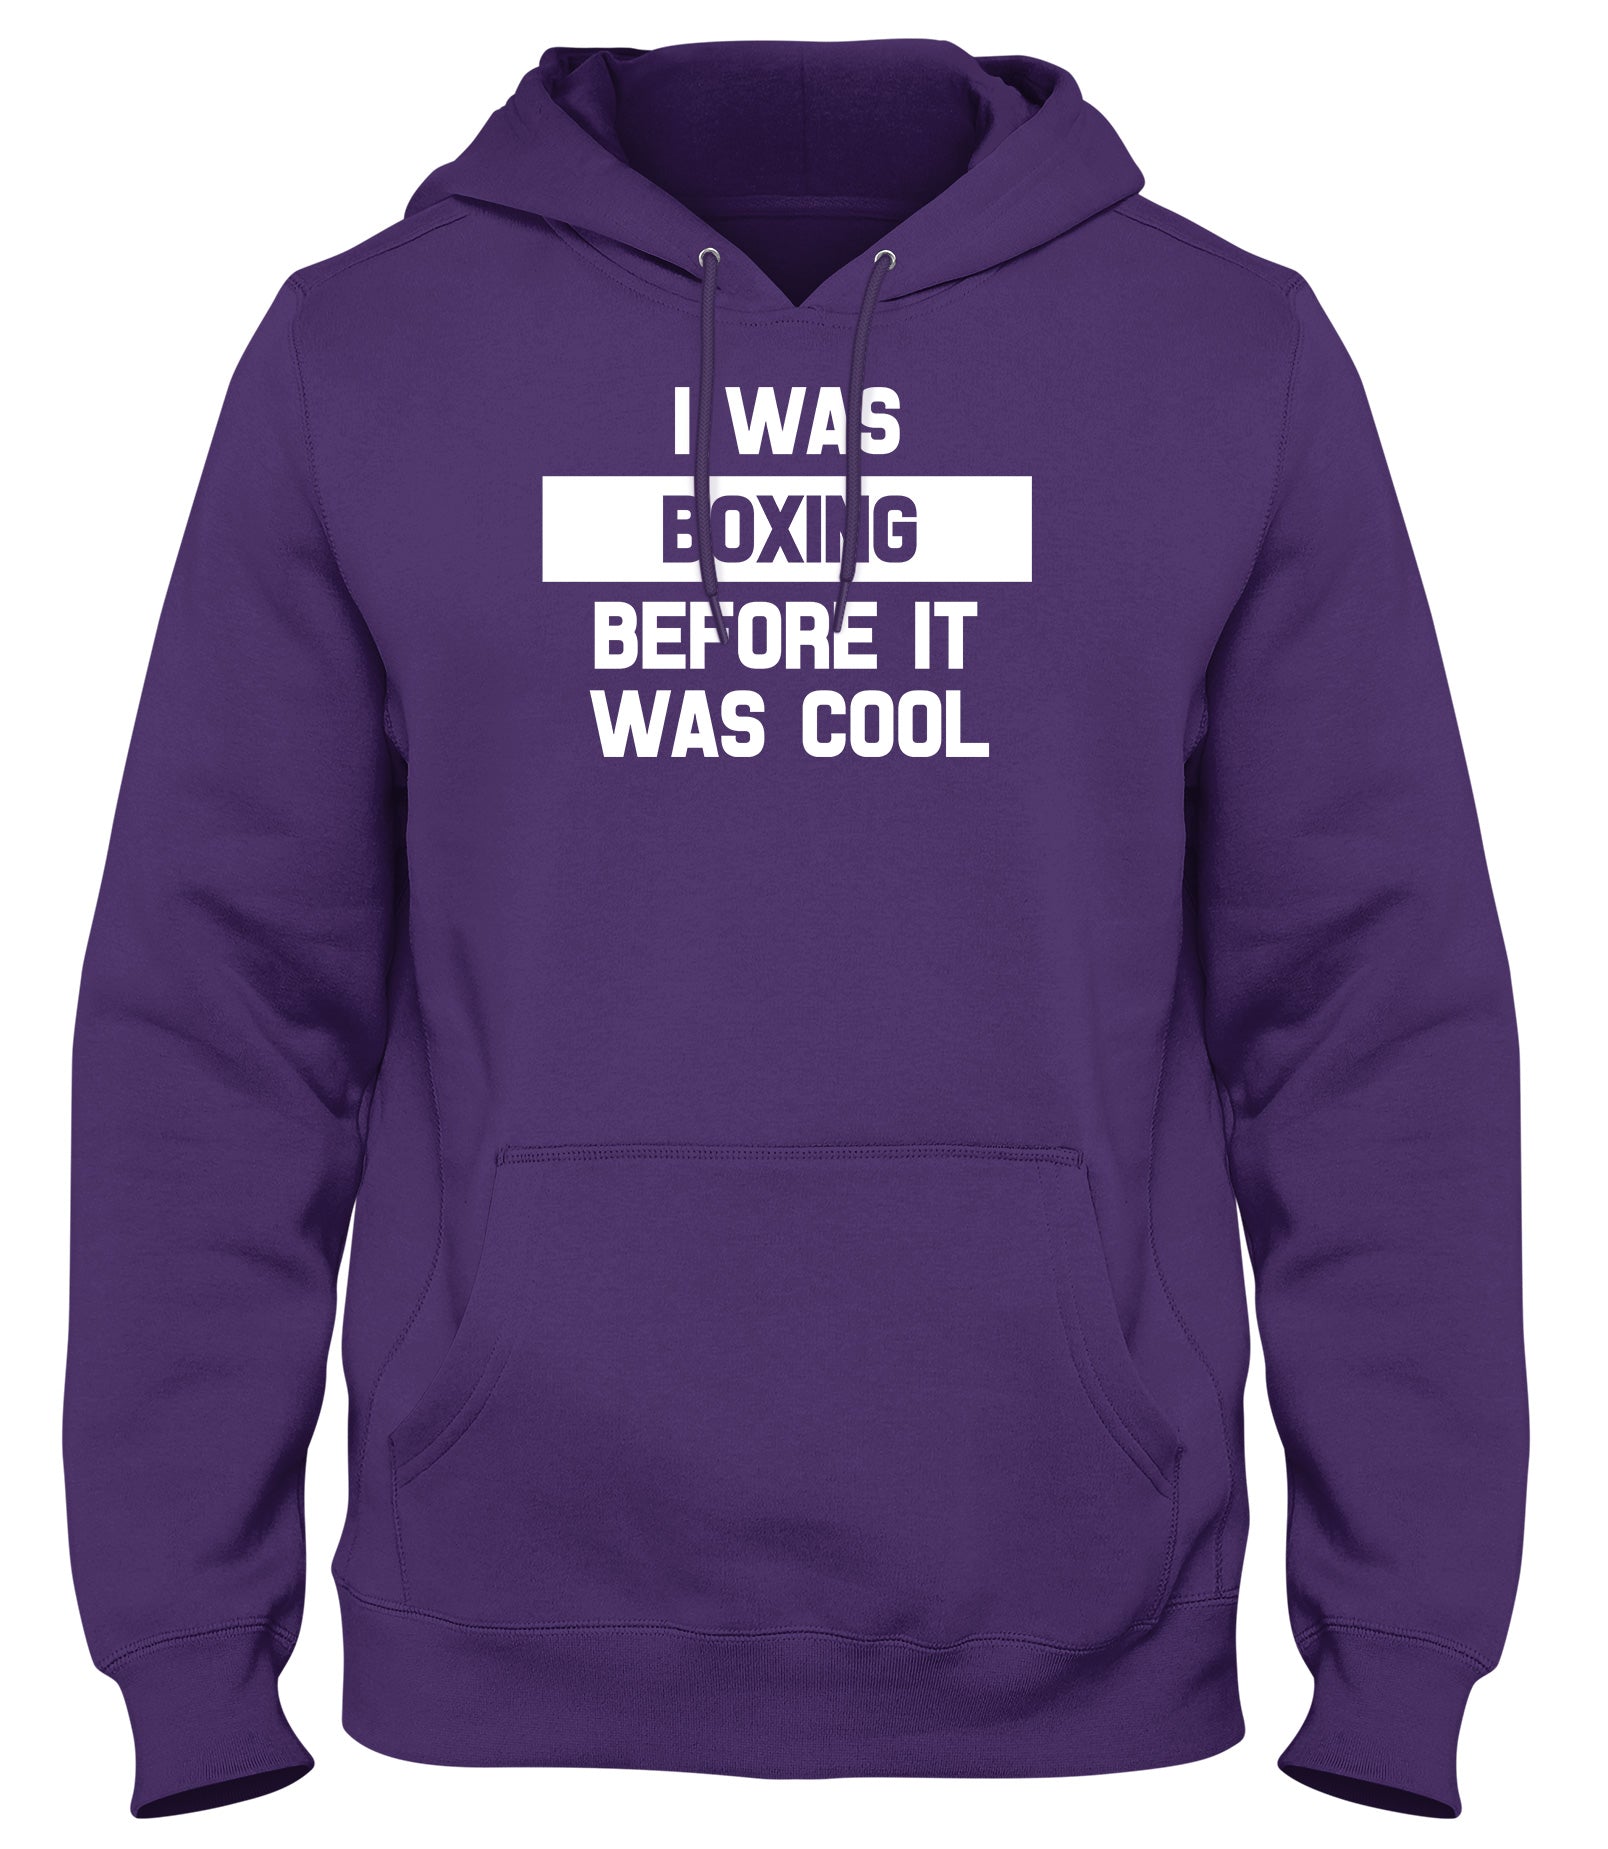 I WAS BOXING BEFORE IT WAS COOL WOMENS LADIES MENS UNISEX HOODIE